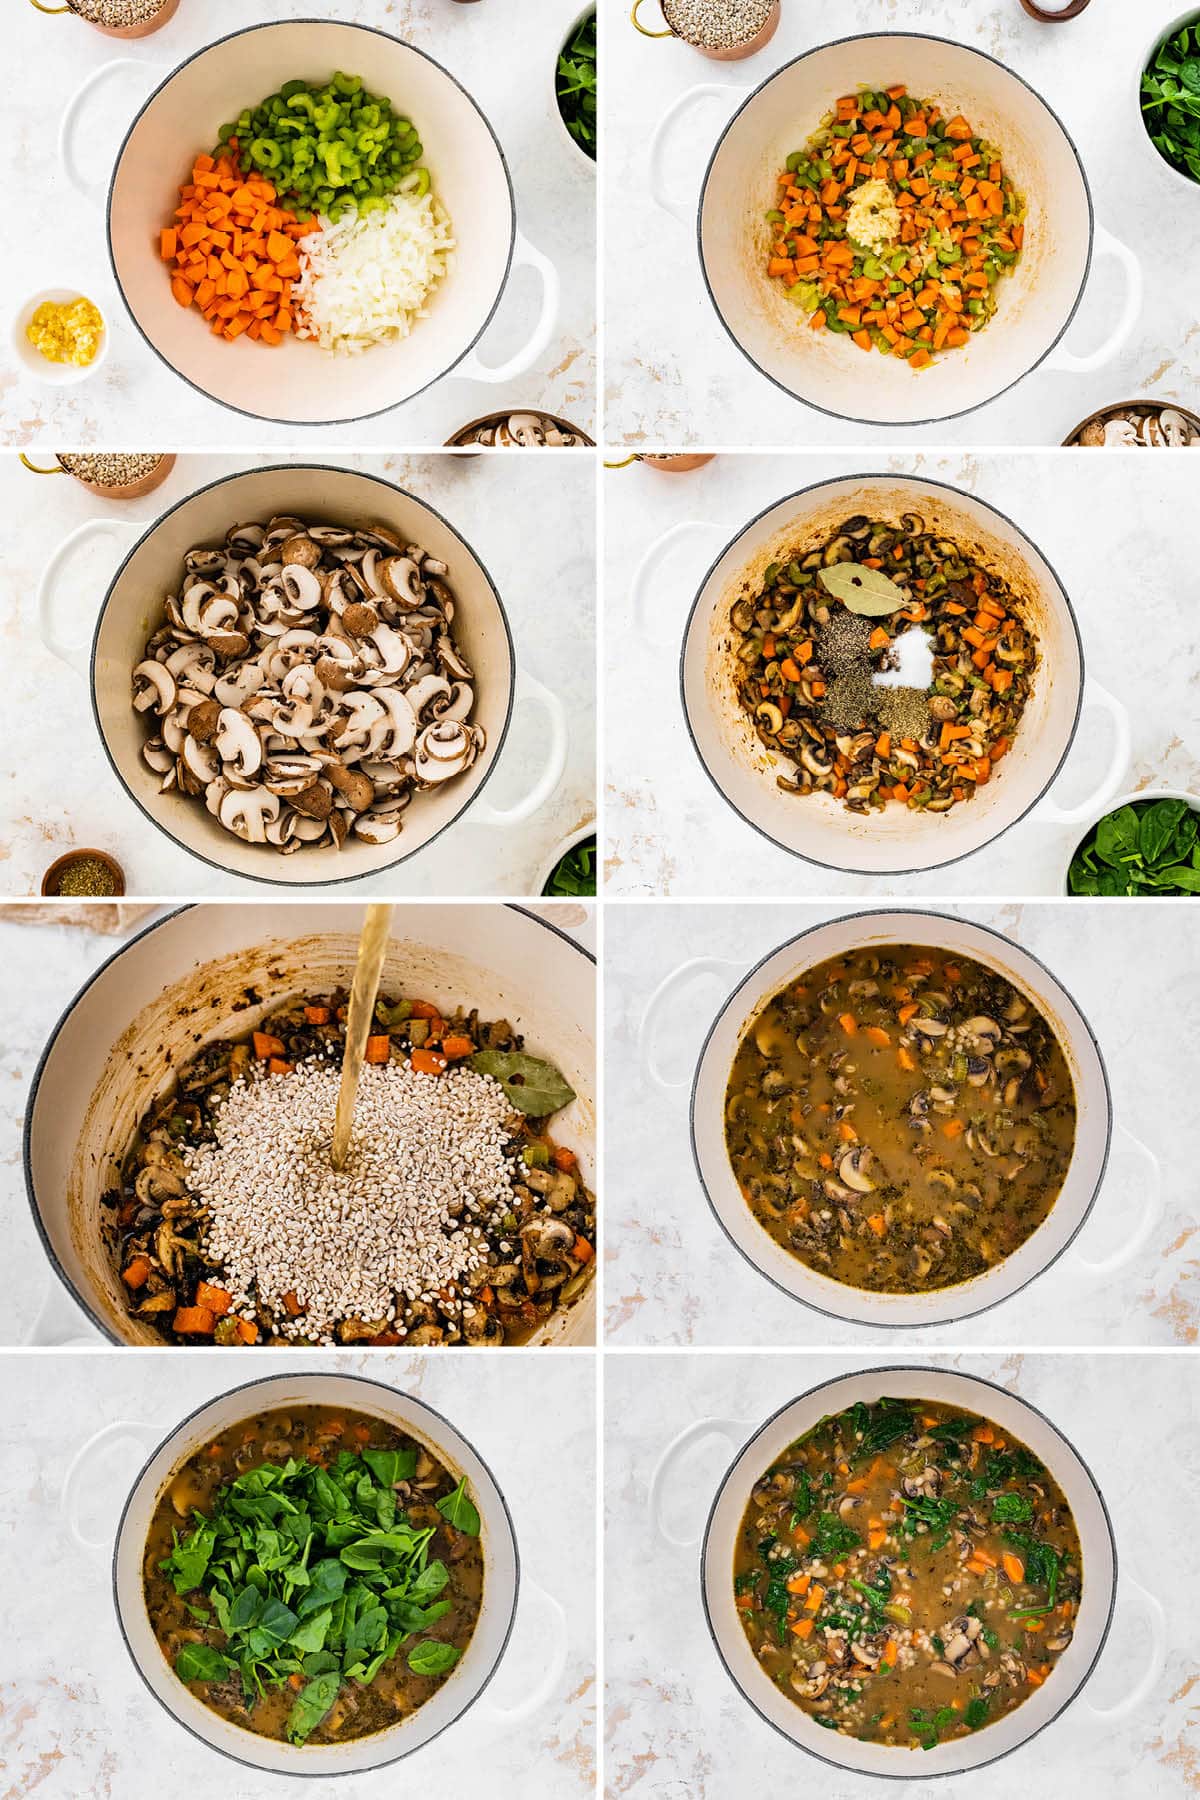 Collage of 8 photos showing to steps to make Mushroom Barley Soup.